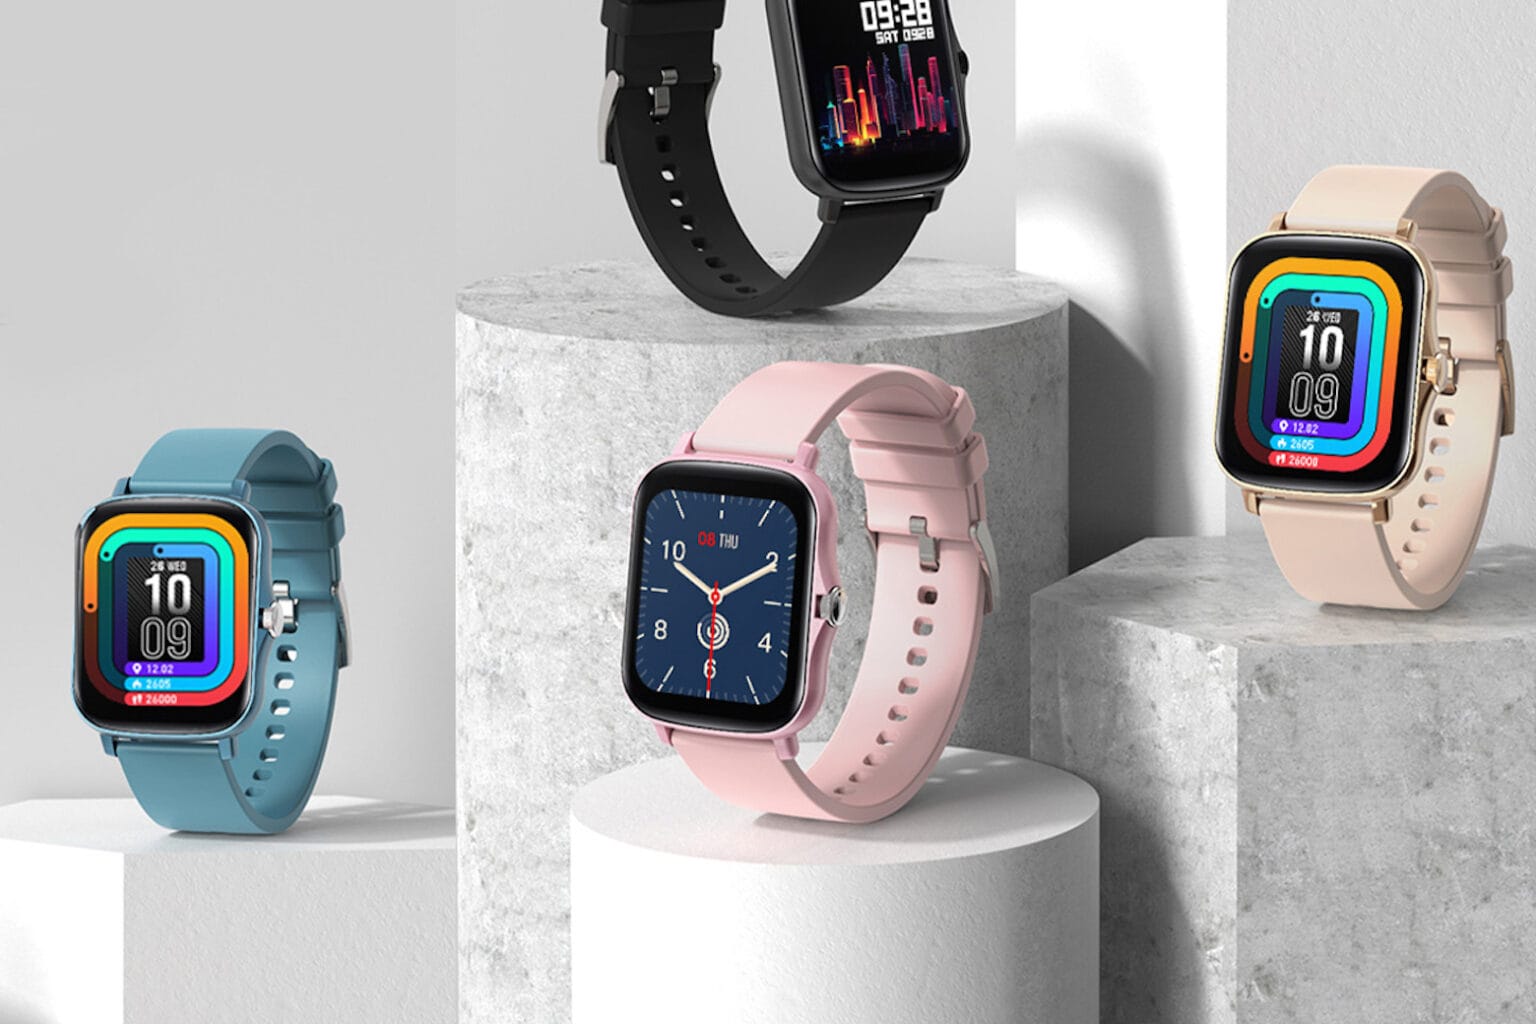 This Apple Watch alternative looks great and costs less.